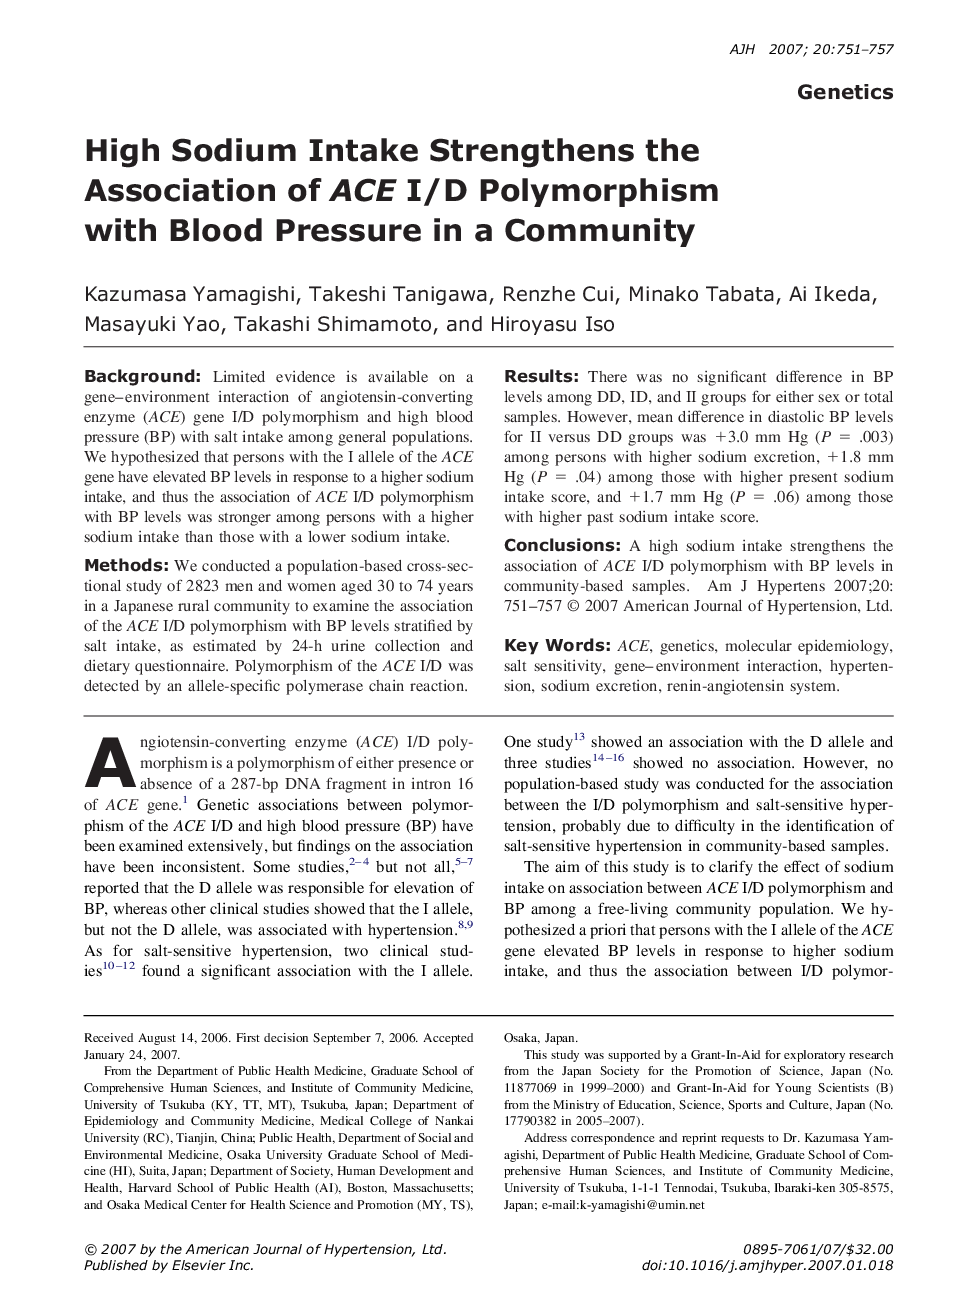 High Sodium Intake Strengthens the Association of ACE I/D Polymorphism with Blood Pressure in a Community